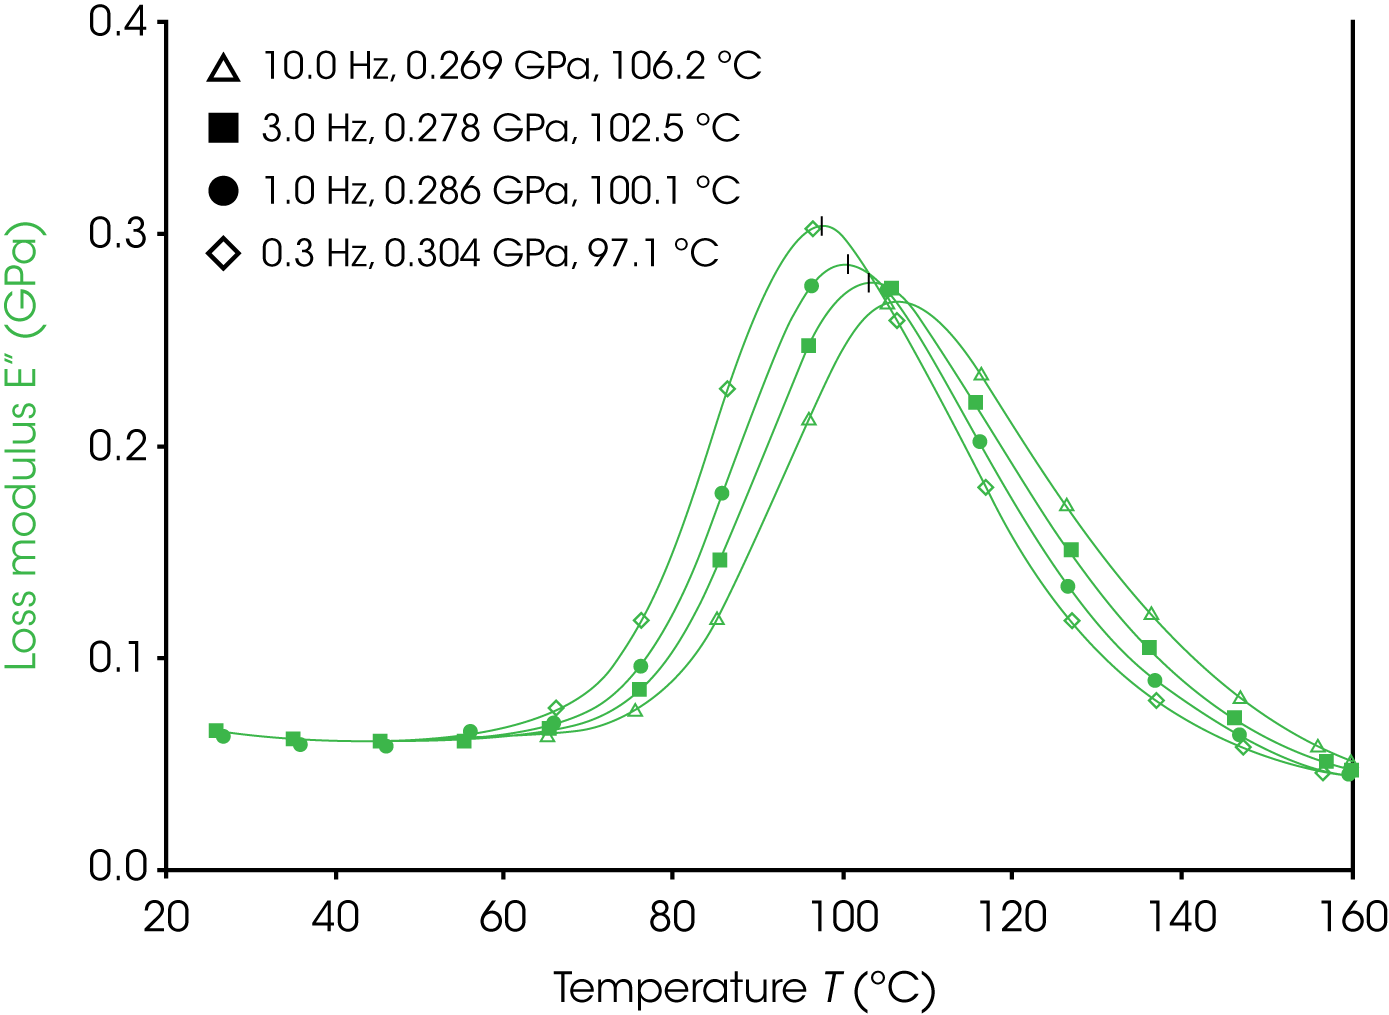 Figure 3. Loss modulus of a PET film at multiple frequencies with signal max values and glass transition temperatures.